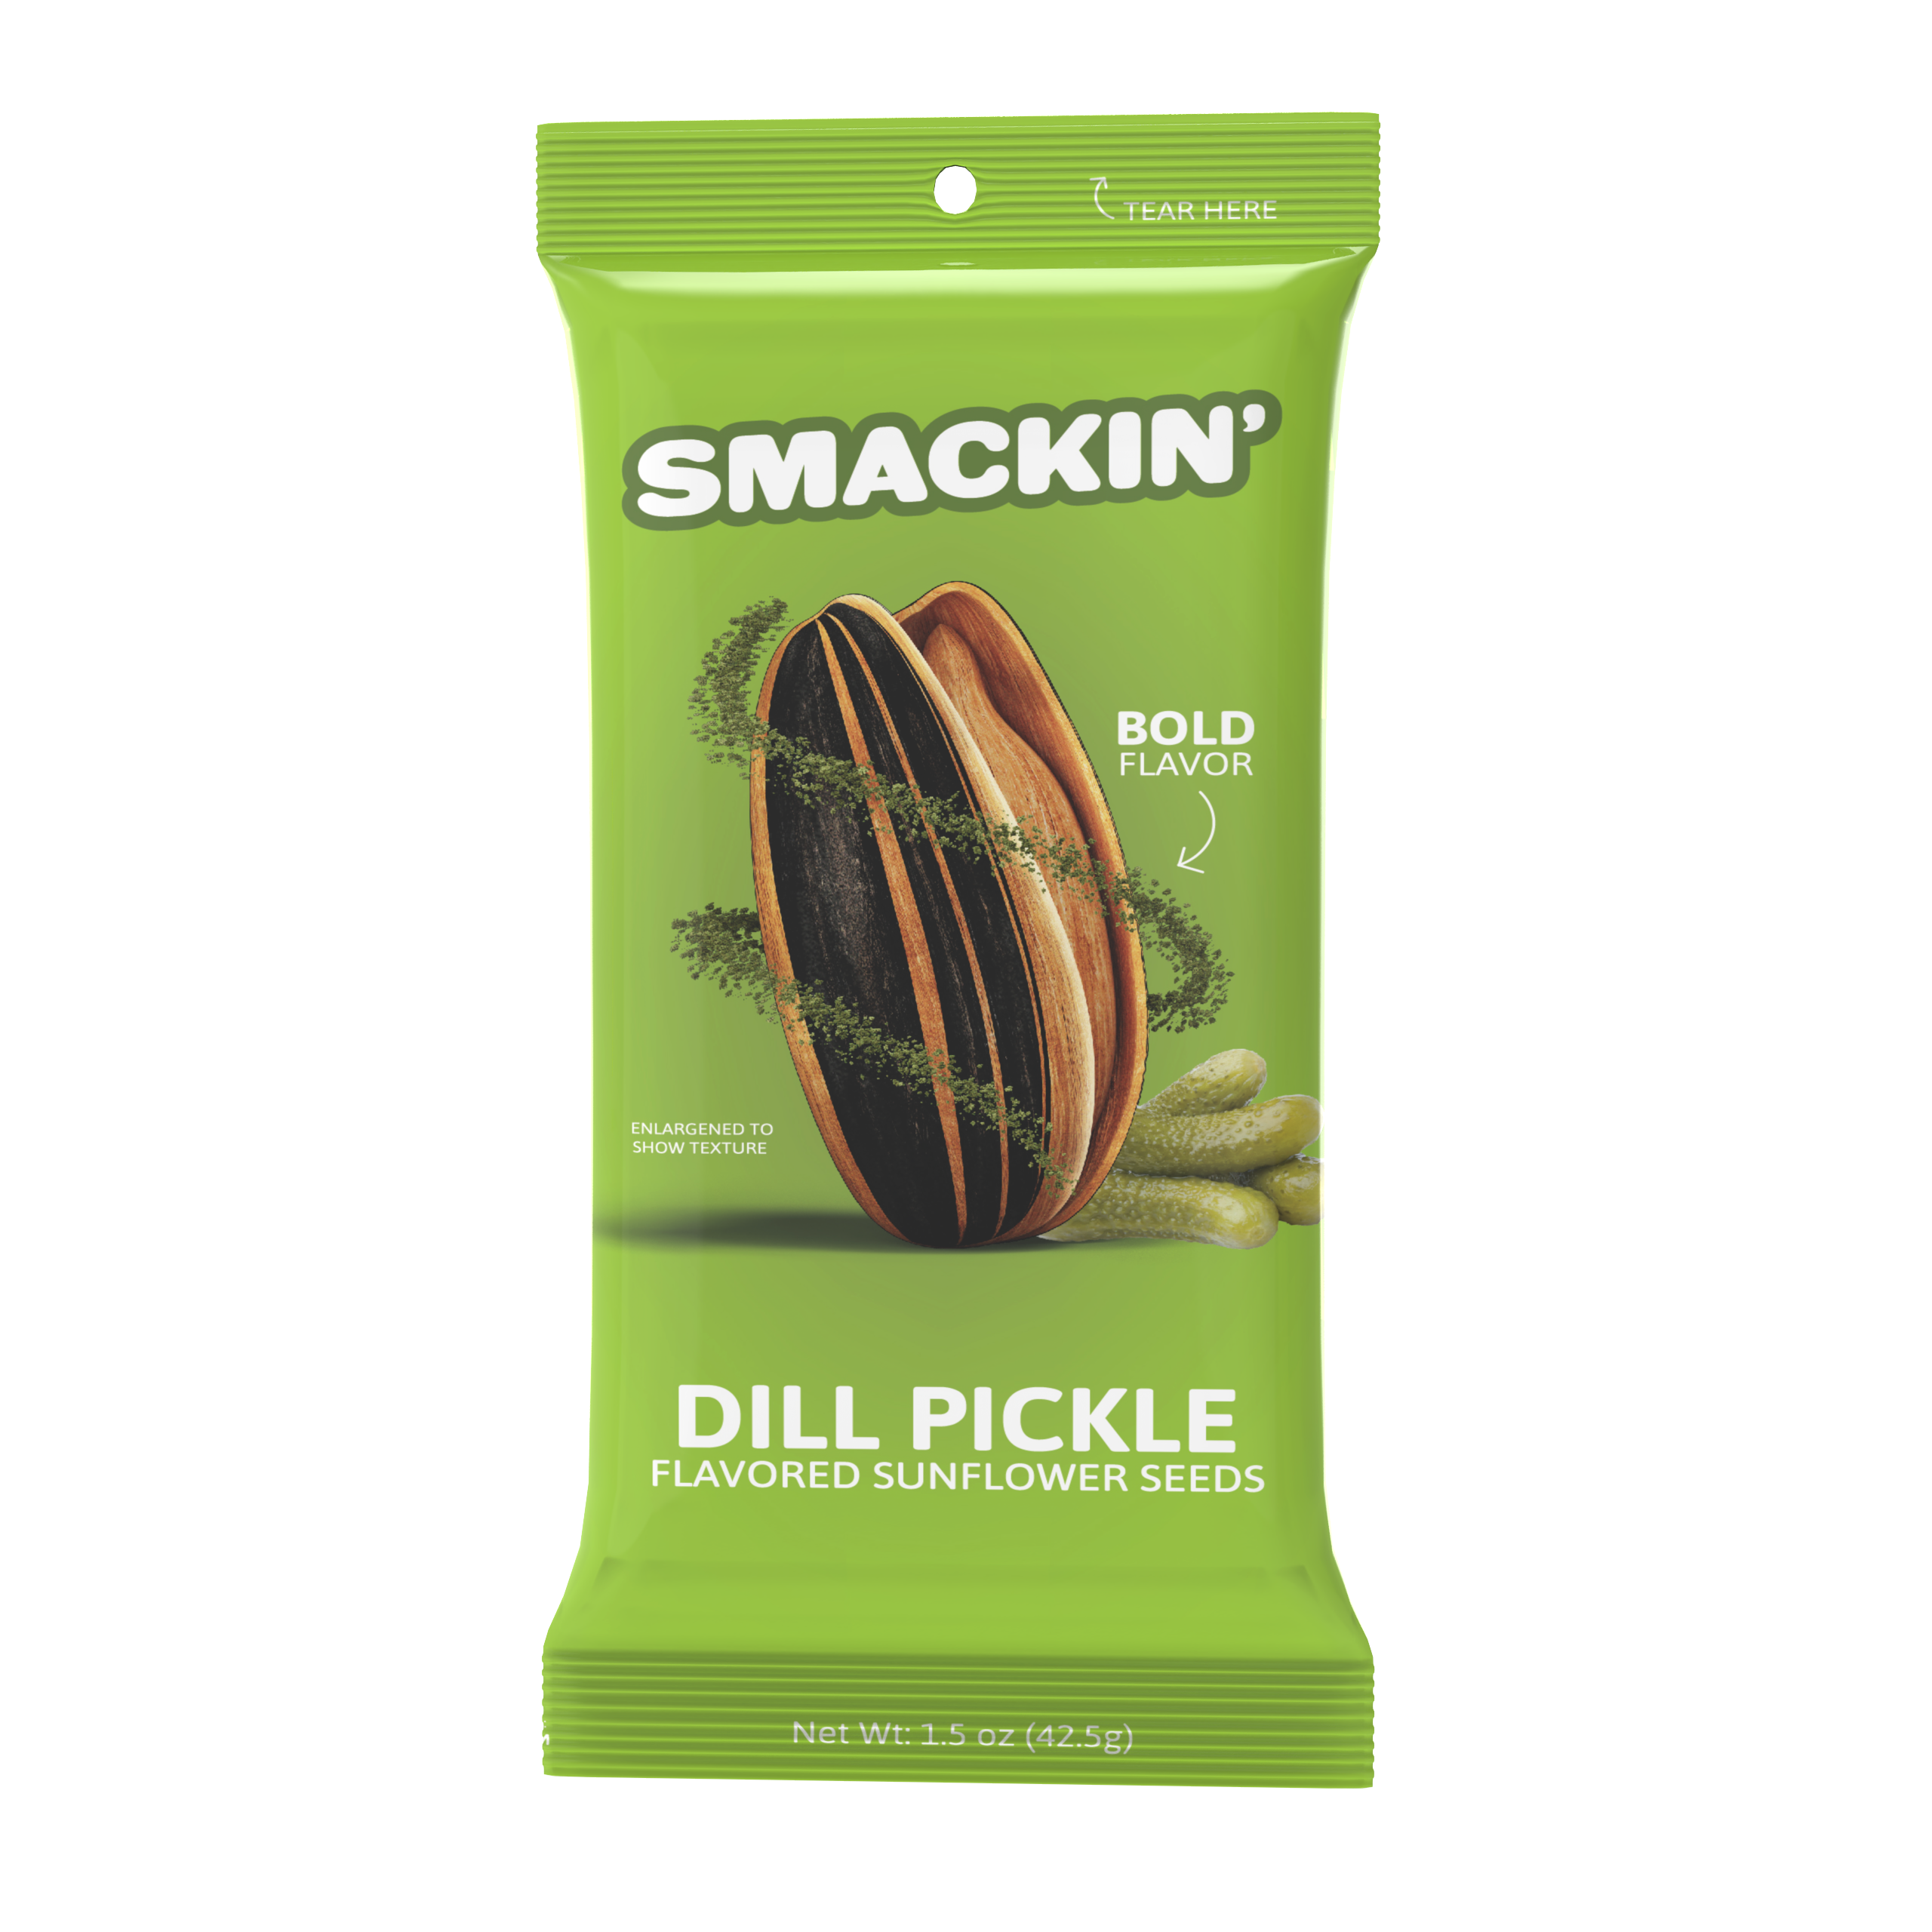 DILL PICKLE